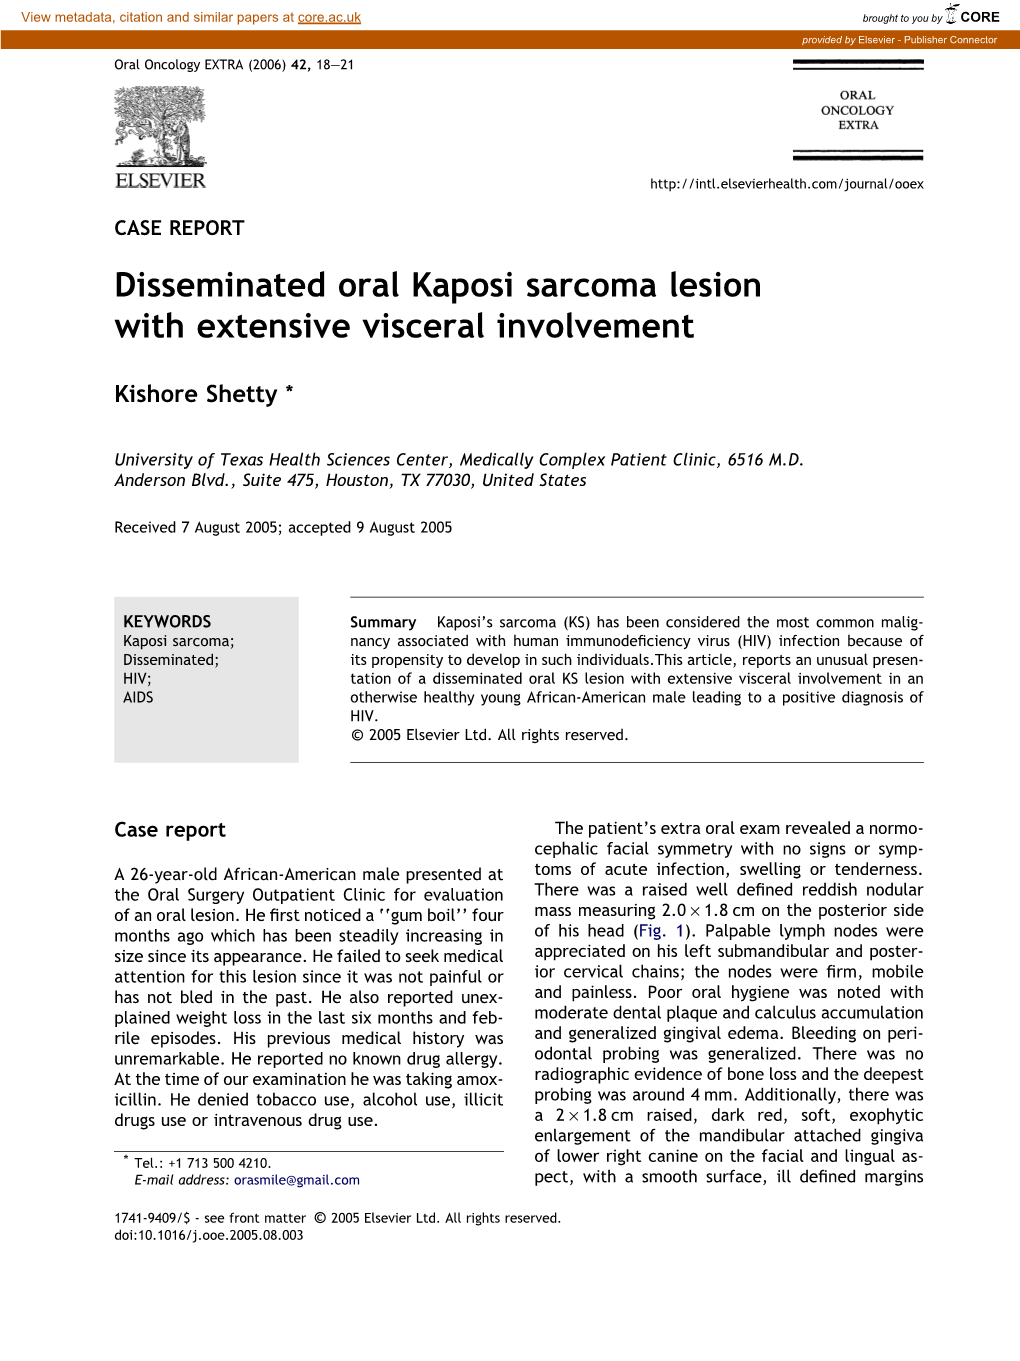 Disseminated Oral Kaposi Sarcoma Lesion with Extensive Visceral Involvement